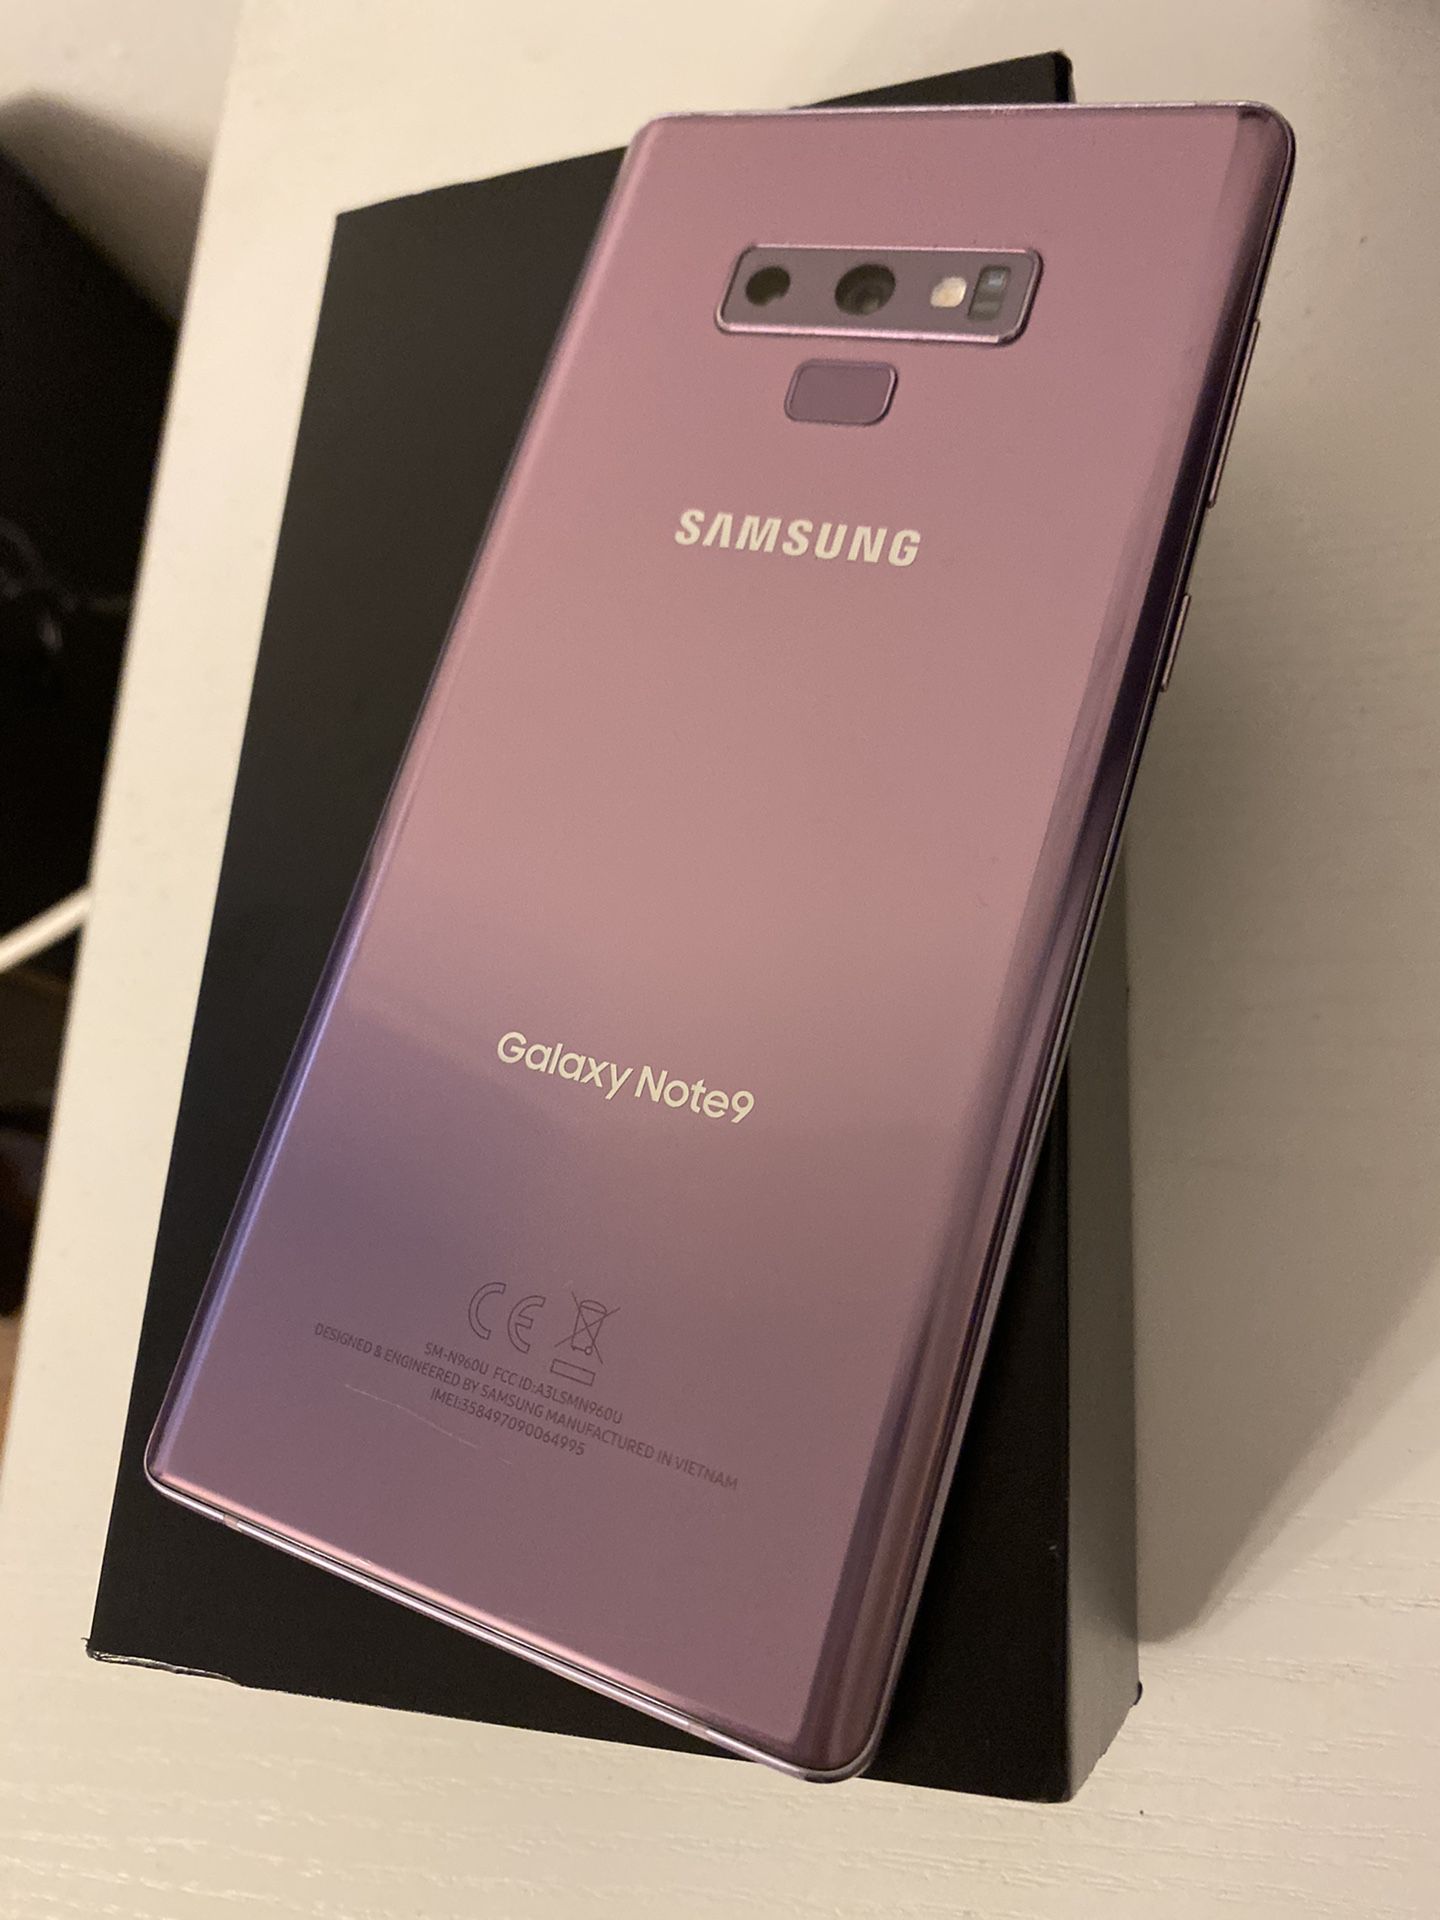 SAMSUNG GALAXY NOTE 9 128 GB FACTORY UNLOCKED USED FOR SALE